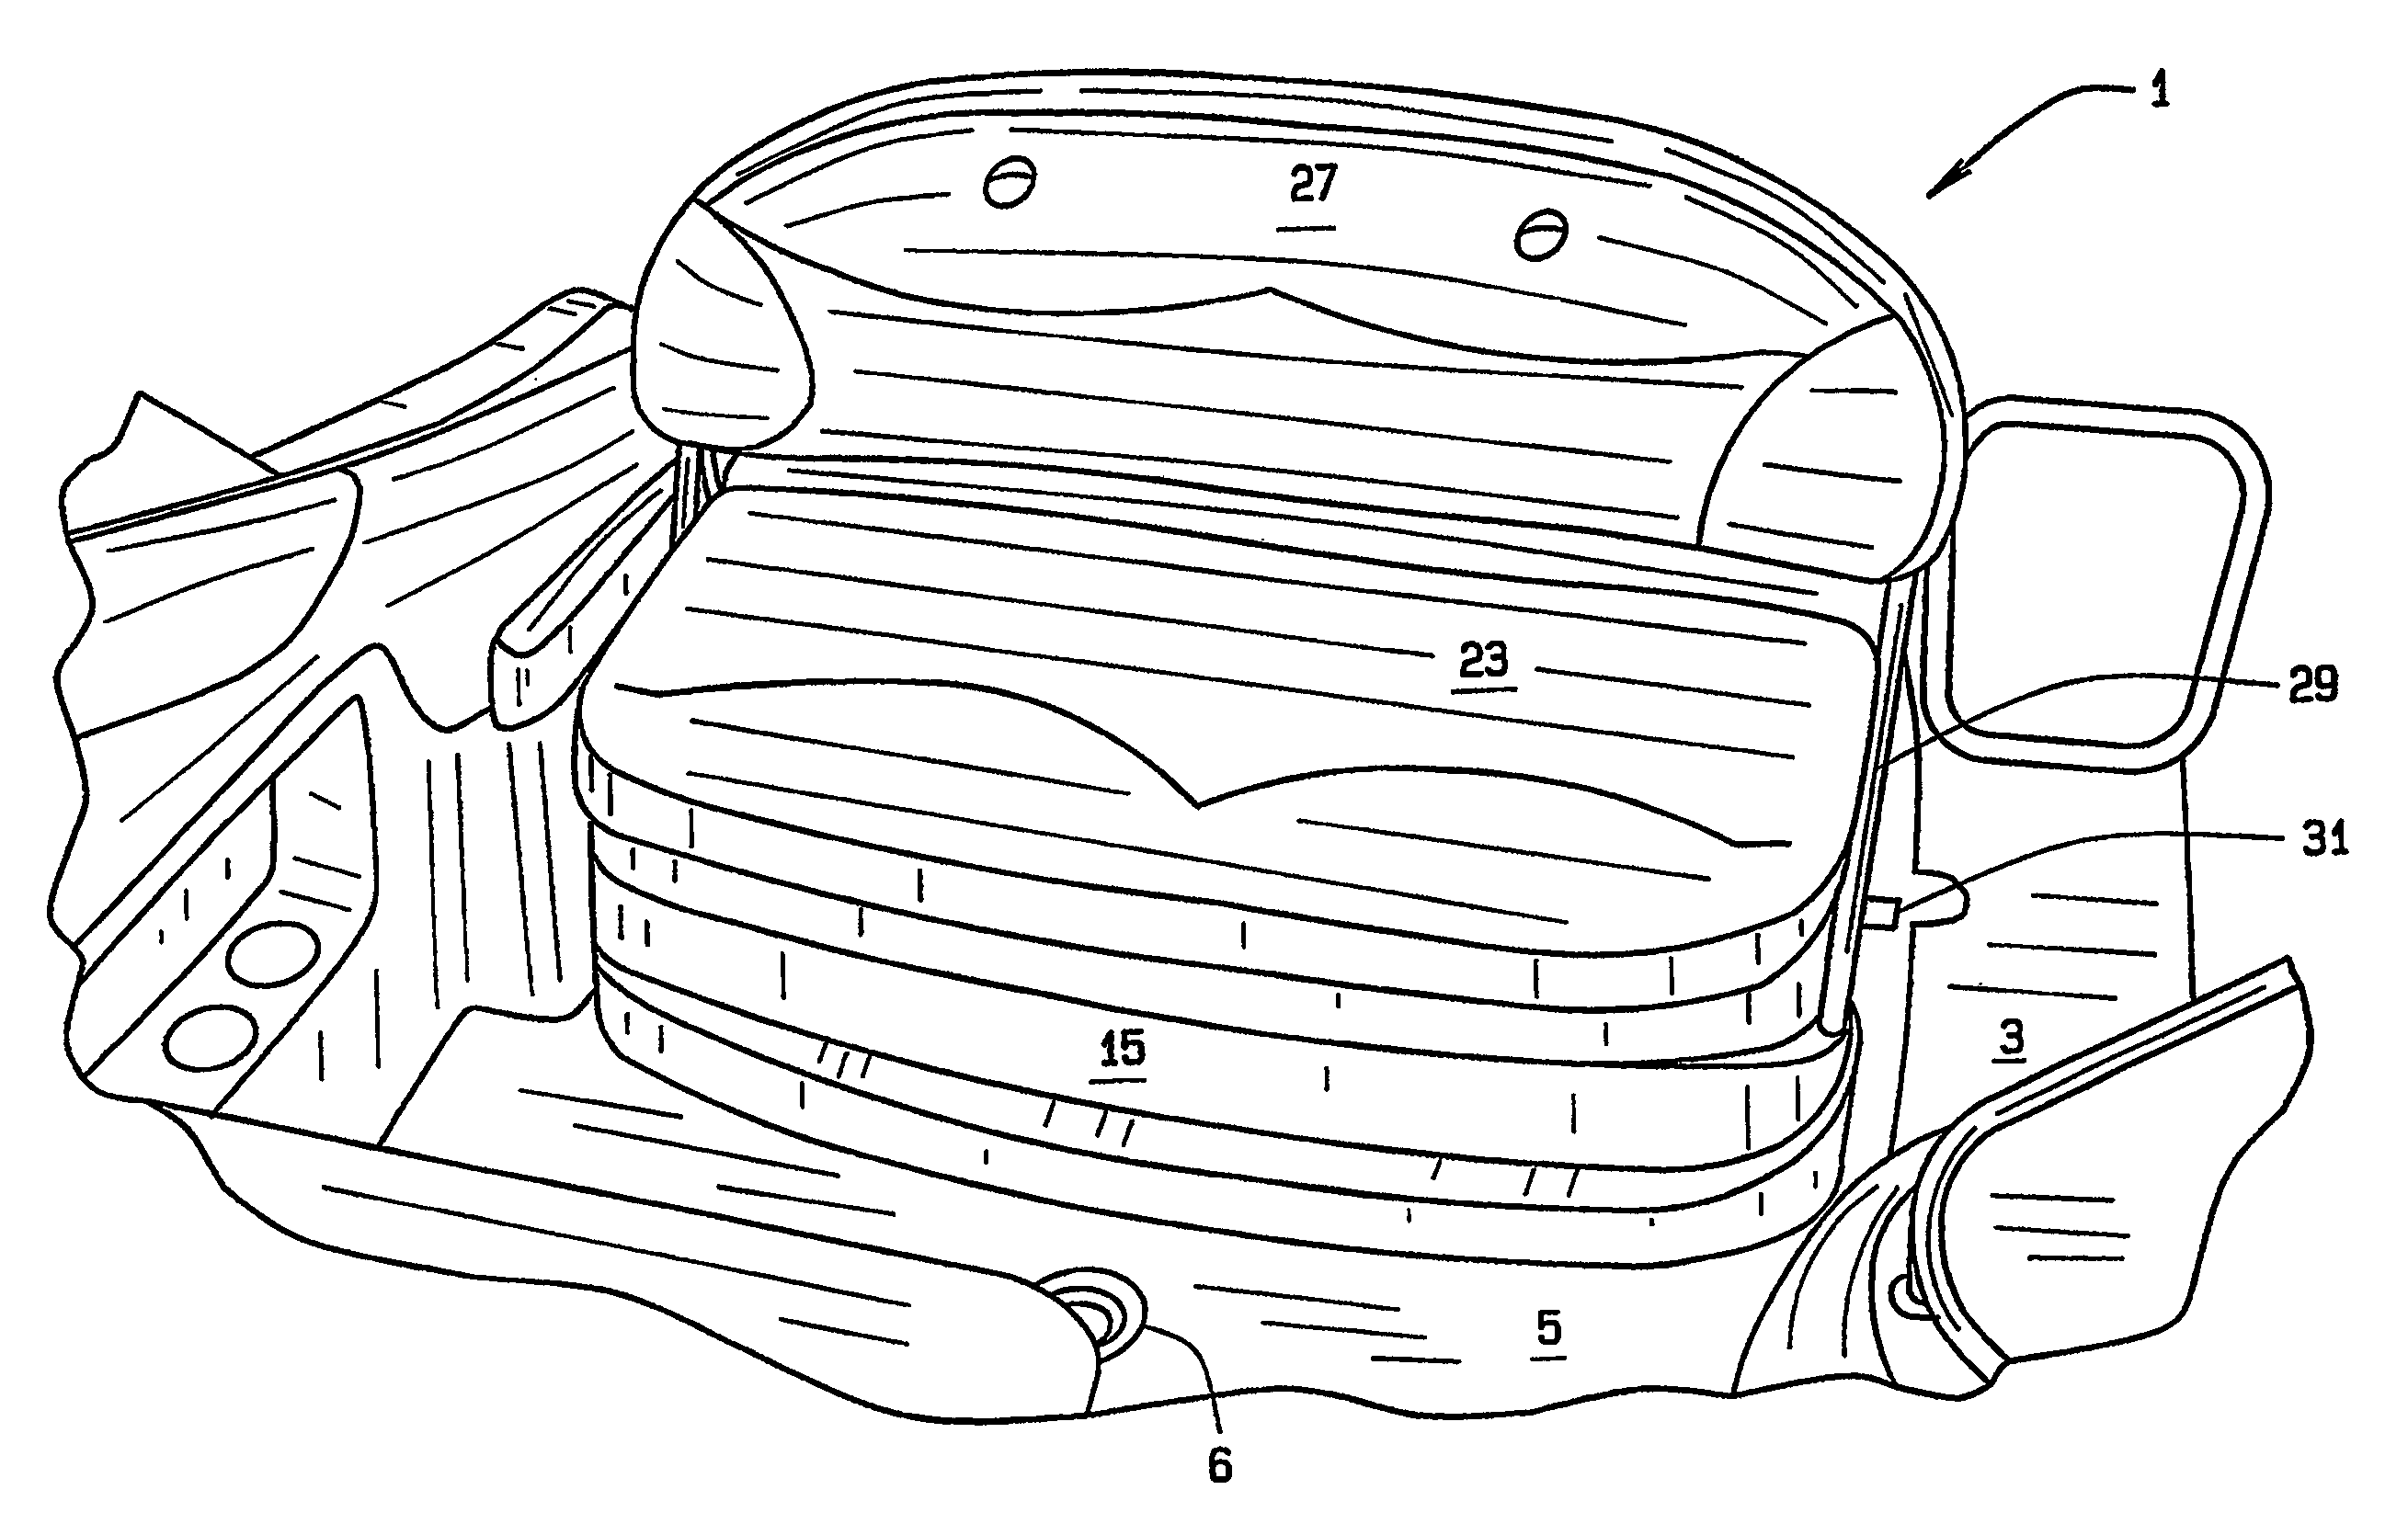 Hatch assembly with contiguous seating area